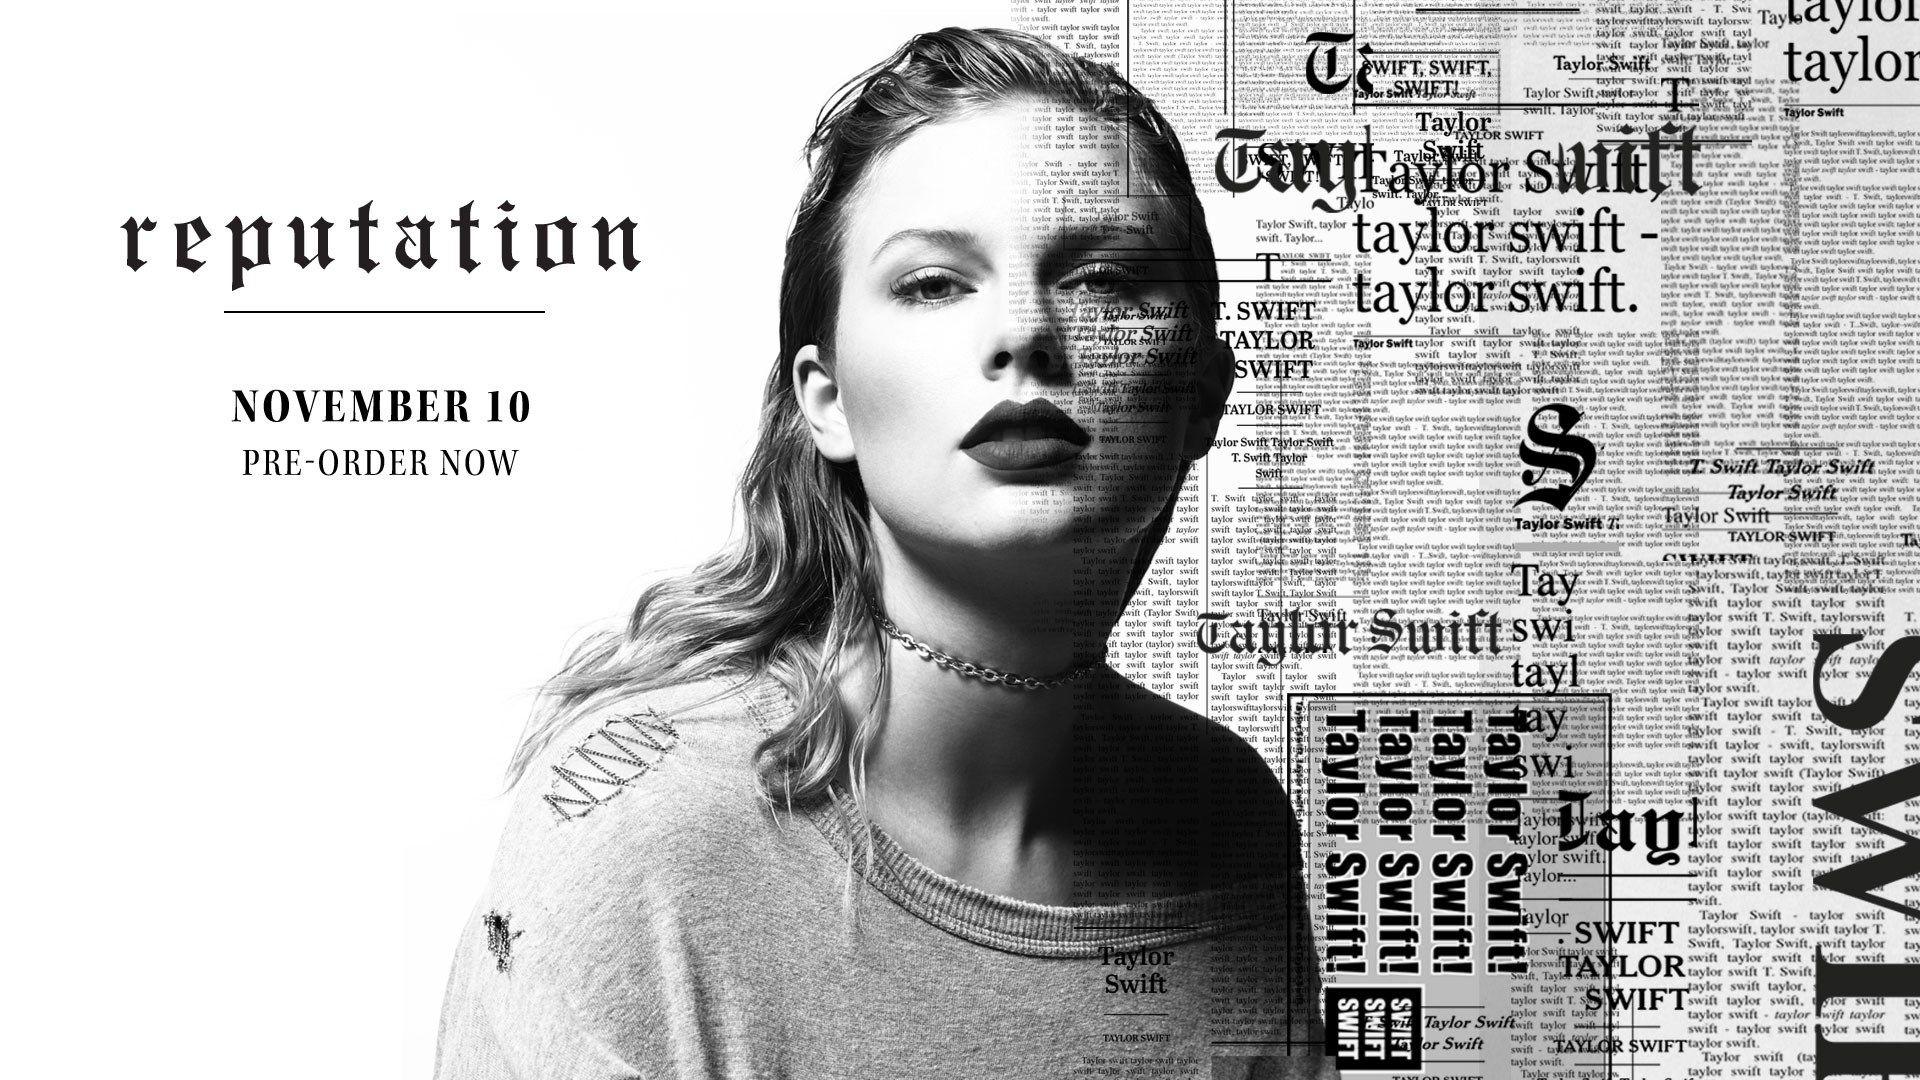 Taylor Swift Just Revealed Her New Album—And We've Got Never Before